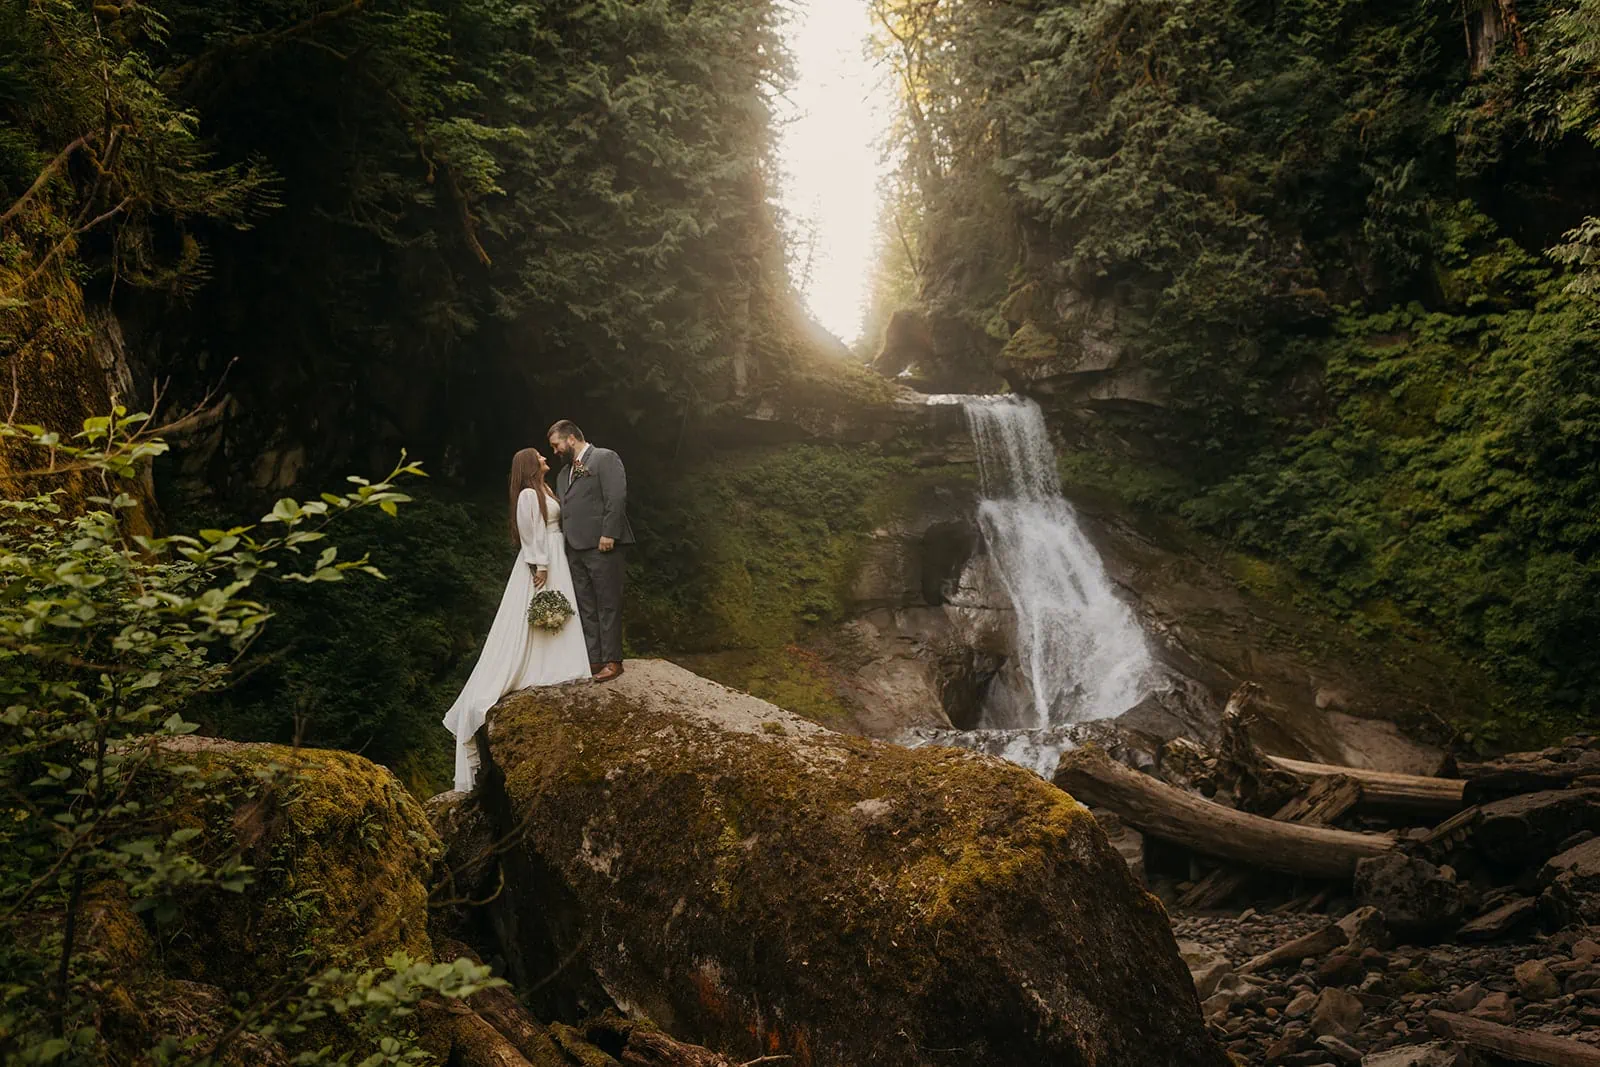 A couple holds each other close near a waterfall in the forest.